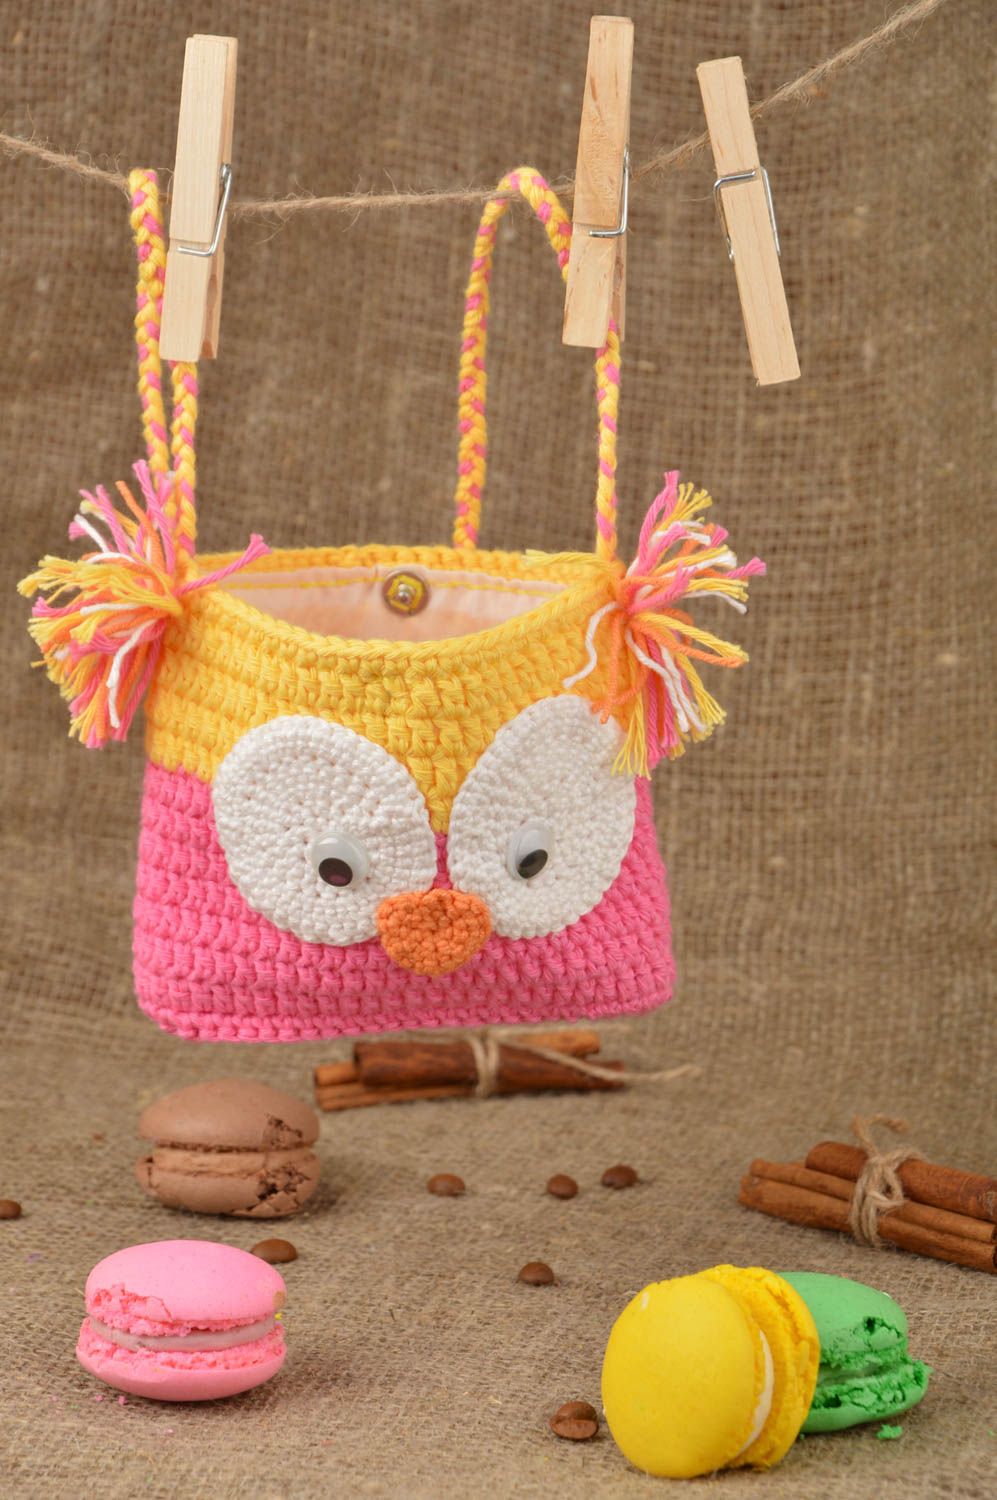 Handmade crocheted beautiful yellow and pink bag for kids in shape of owl photo 1